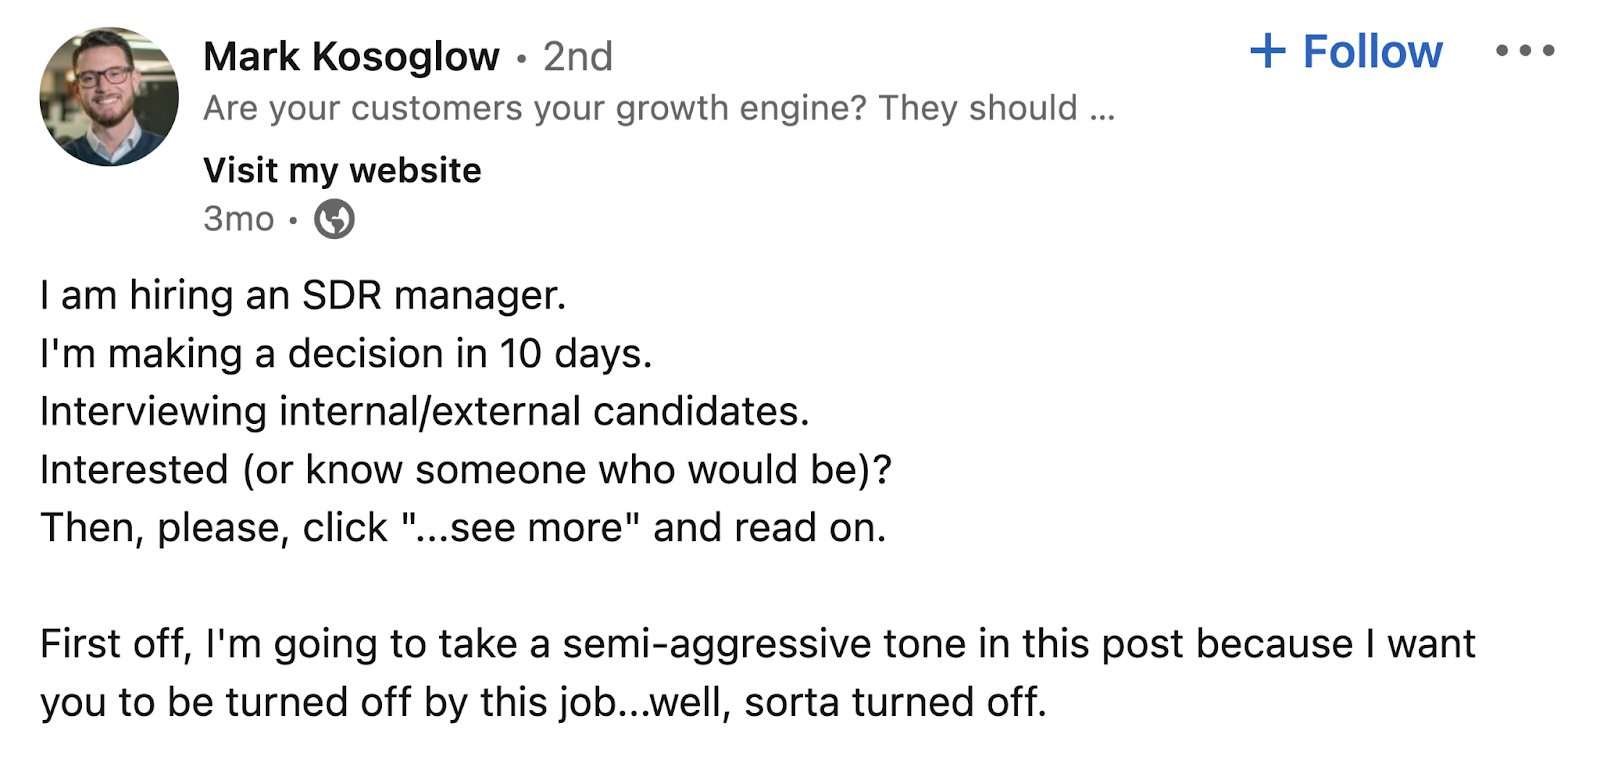 Mark Kosoglow's LinkedIn post about hiring the new SDR manager